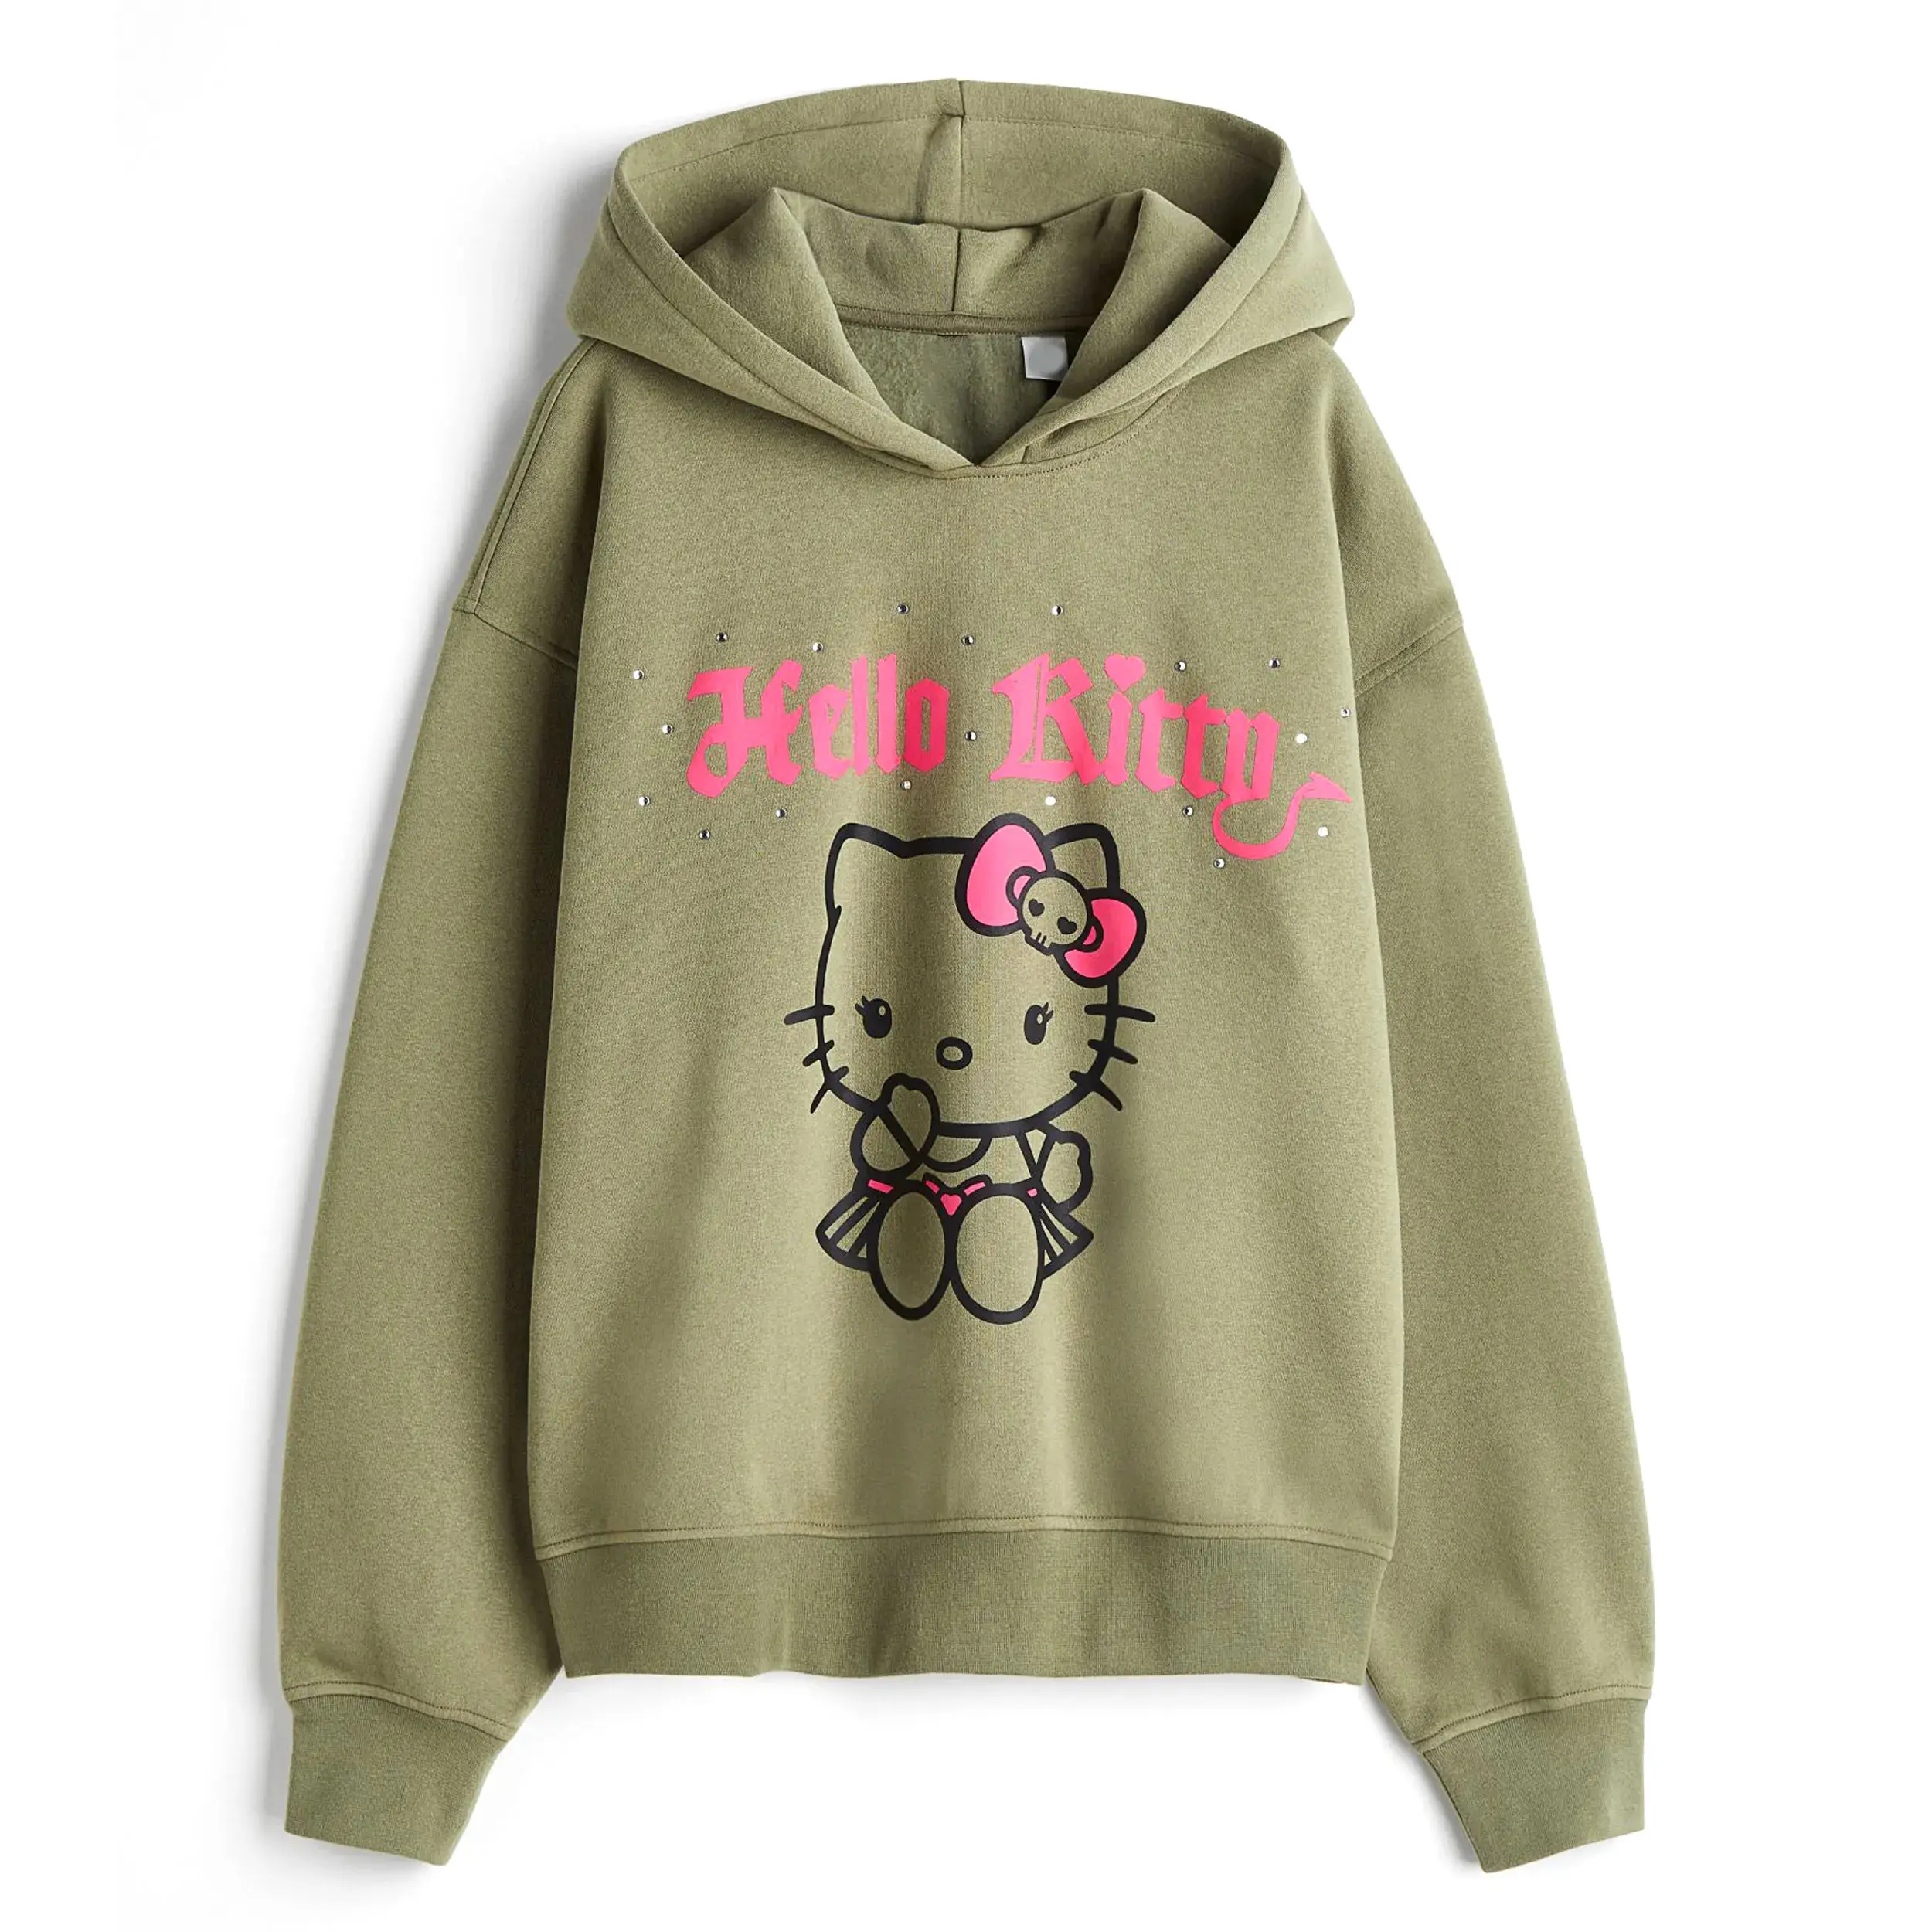 High Quality Hello Kitty hoodie in printed sweatshirt Breathable fabric with a soft brushed inside long sleeves kangaroo pocket